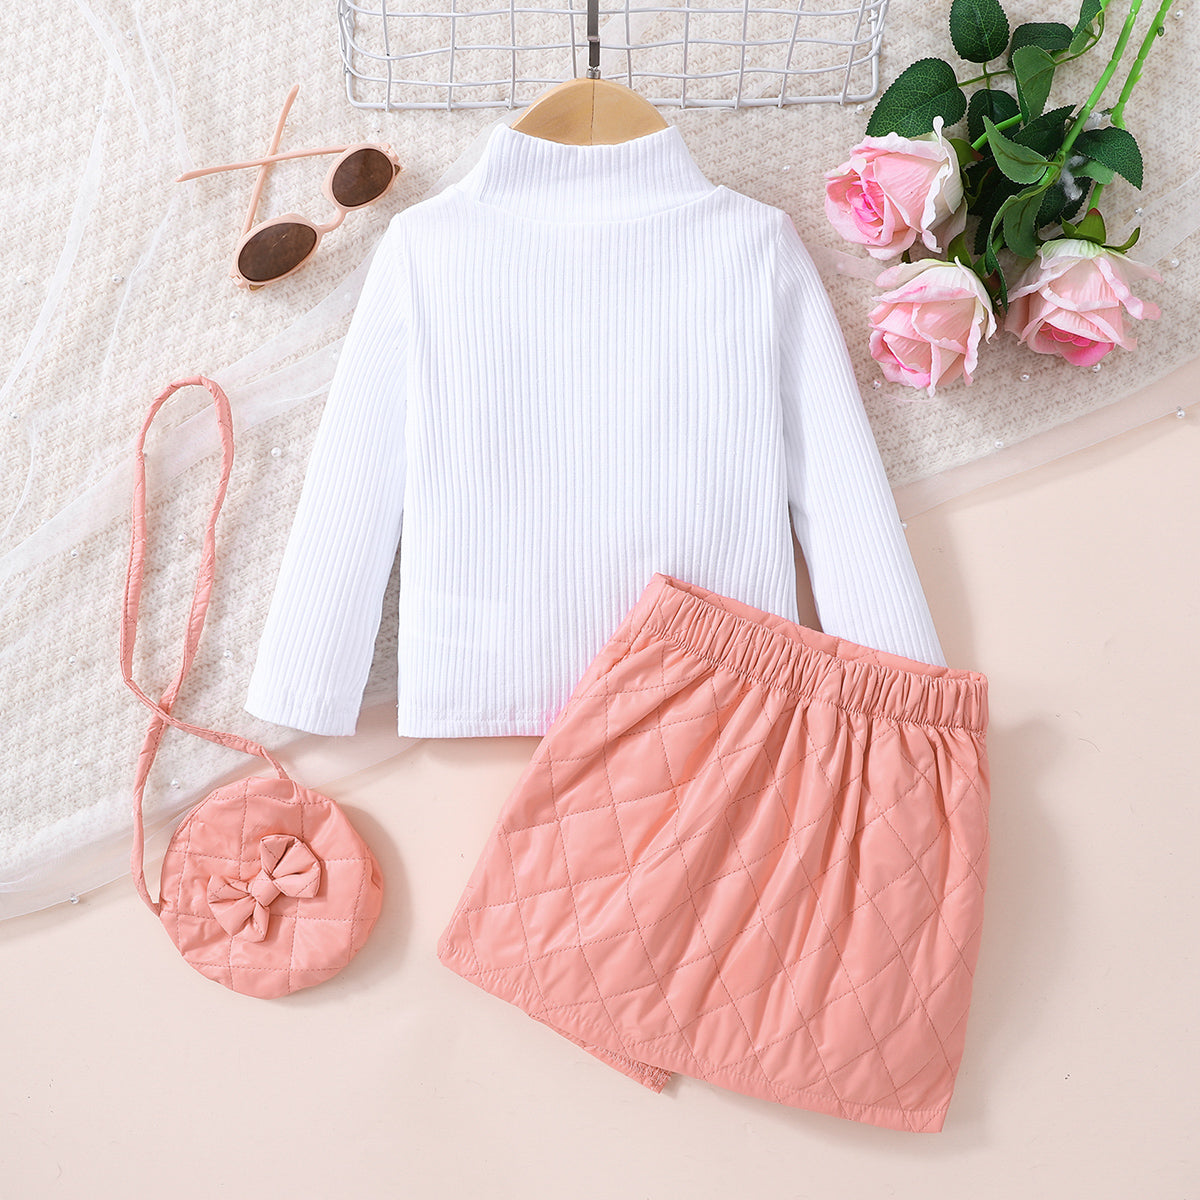 Girls Knit Top and Decorative Button Skirt Set with Bag Trendsi